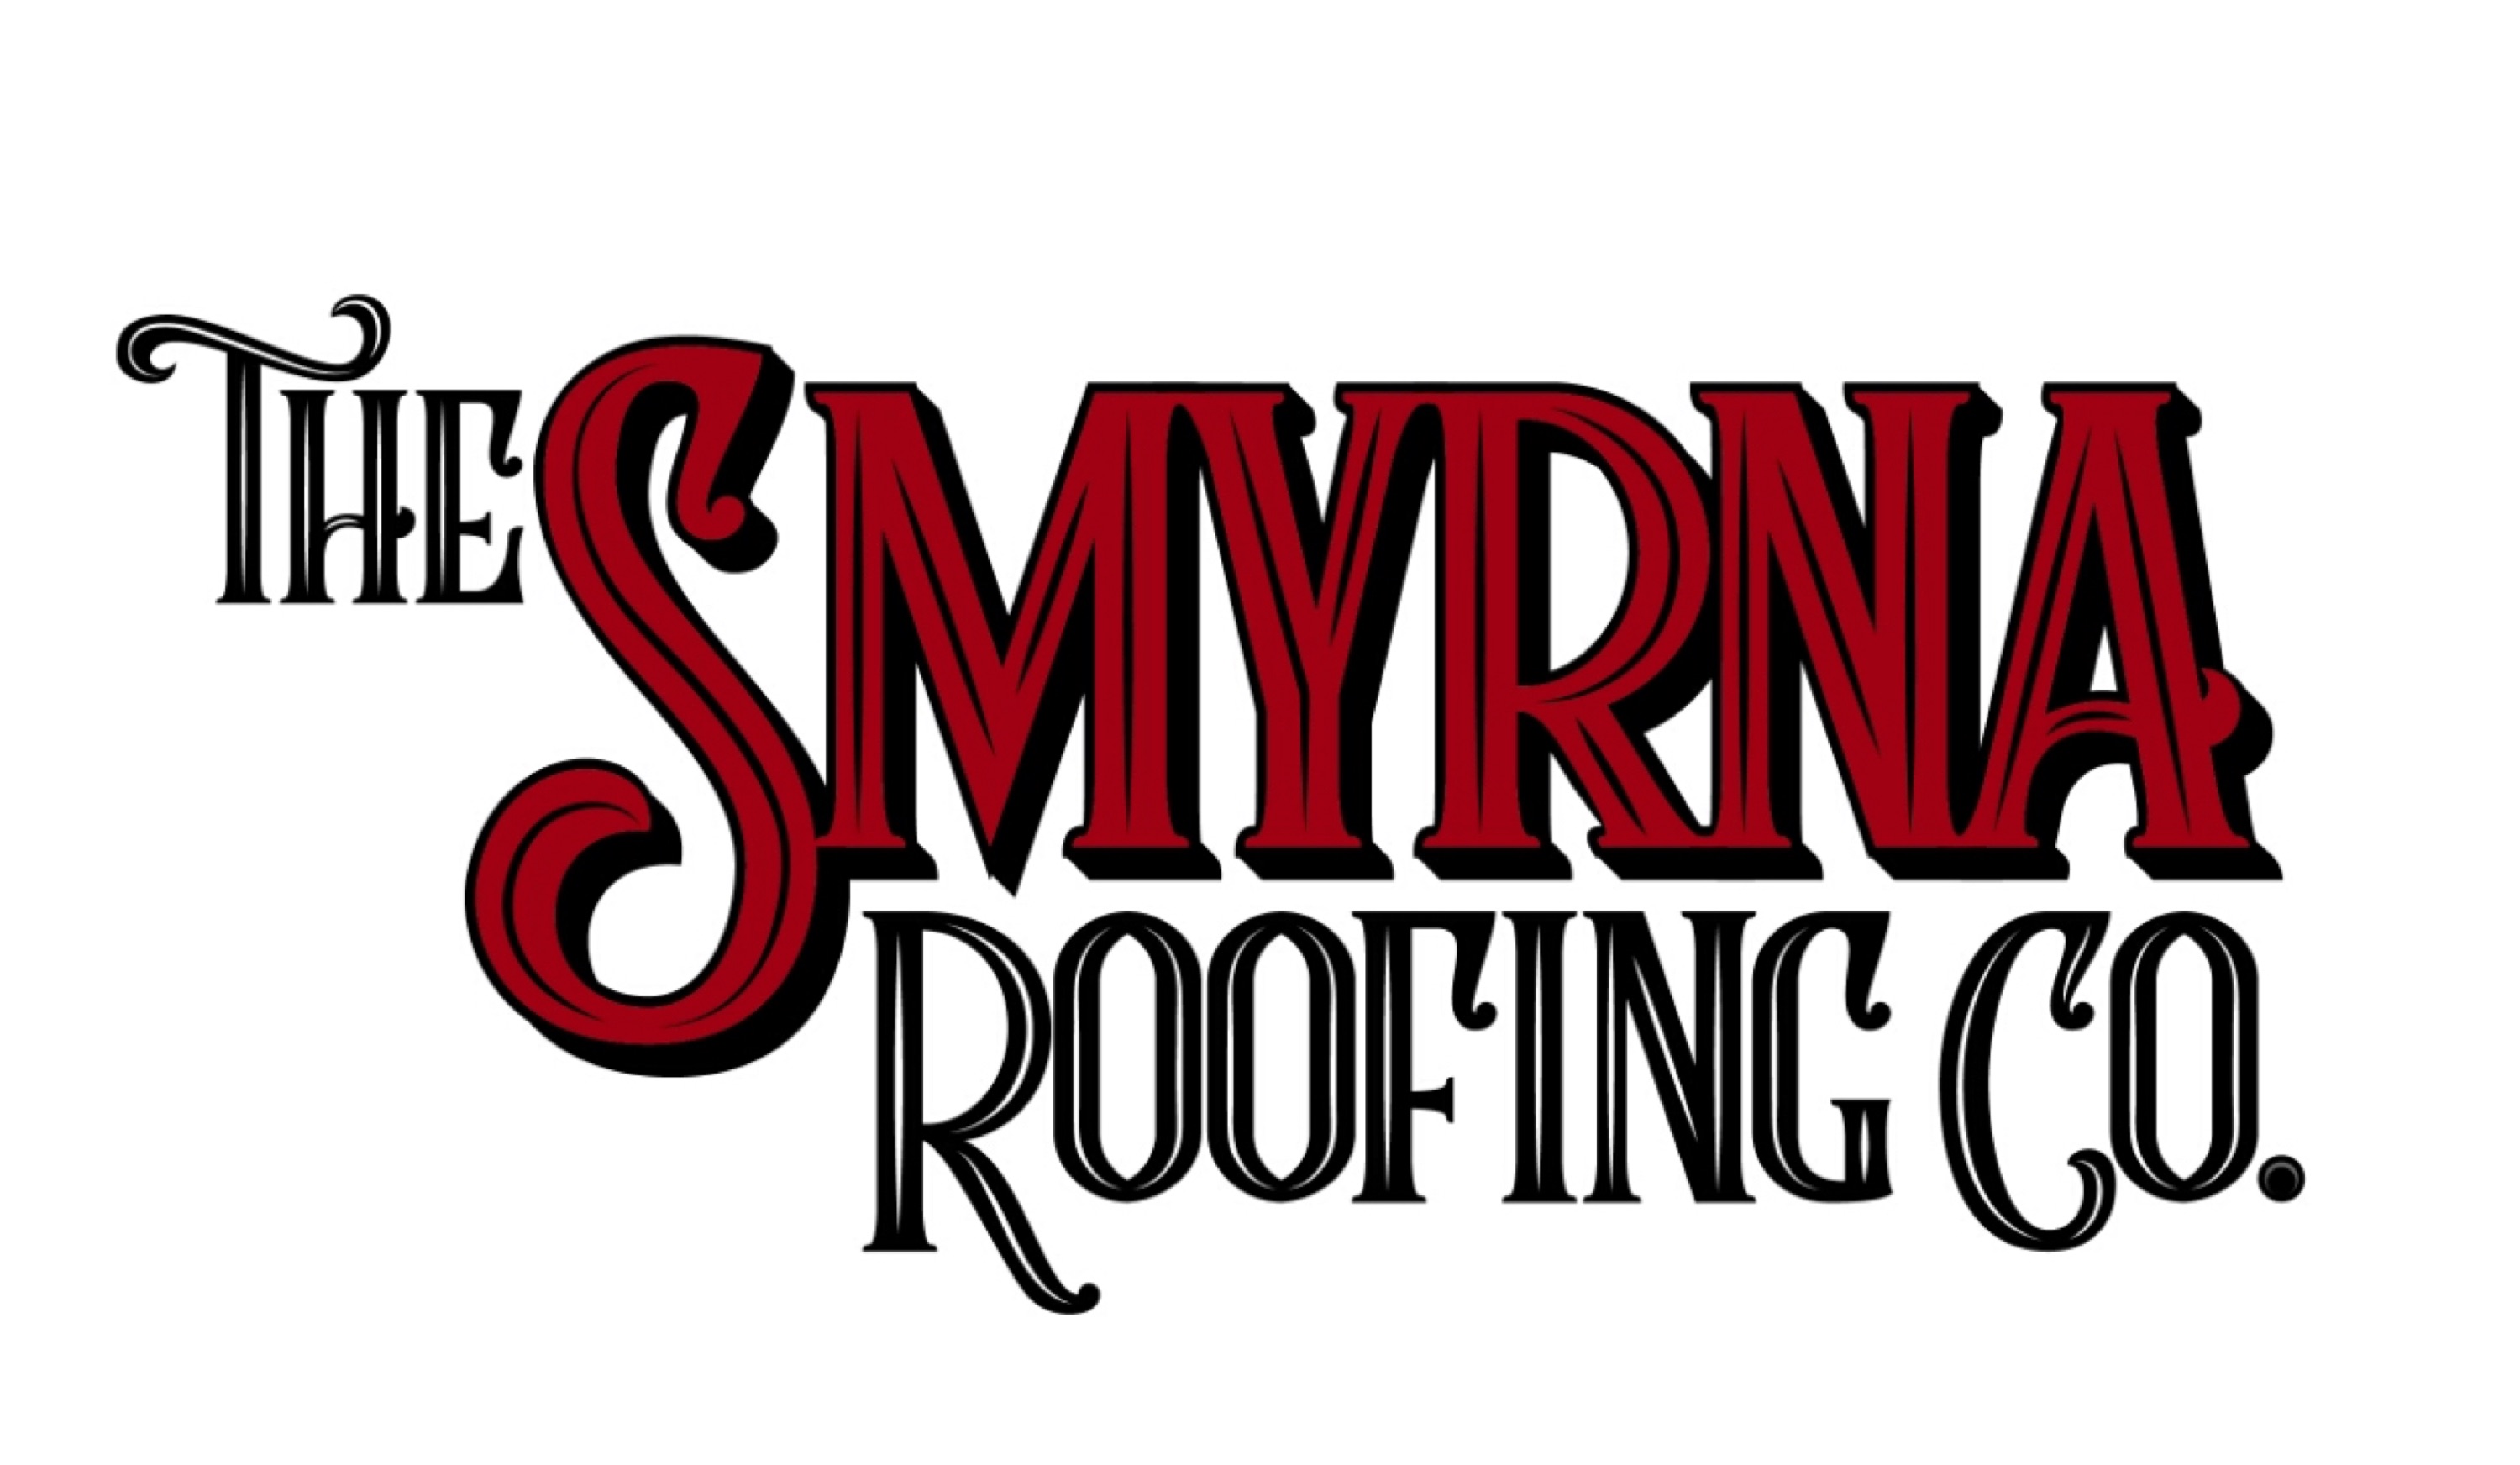 The Smyrna Roofing Co. Logo